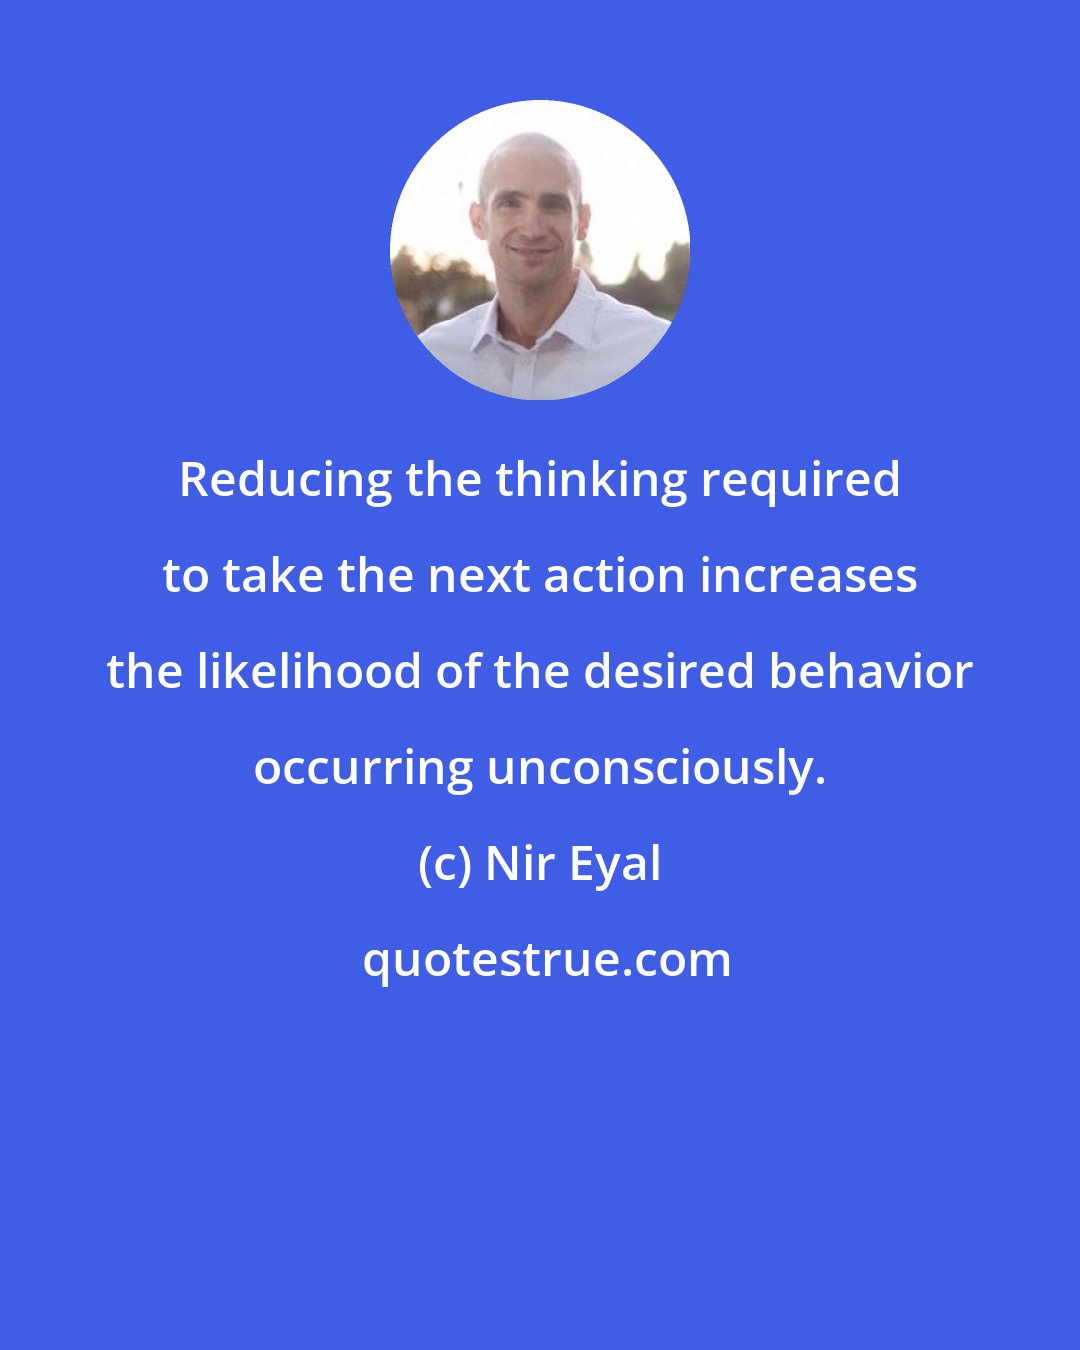 Nir Eyal: Reducing the thinking required to take the next action increases the likelihood of the desired behavior occurring unconsciously.